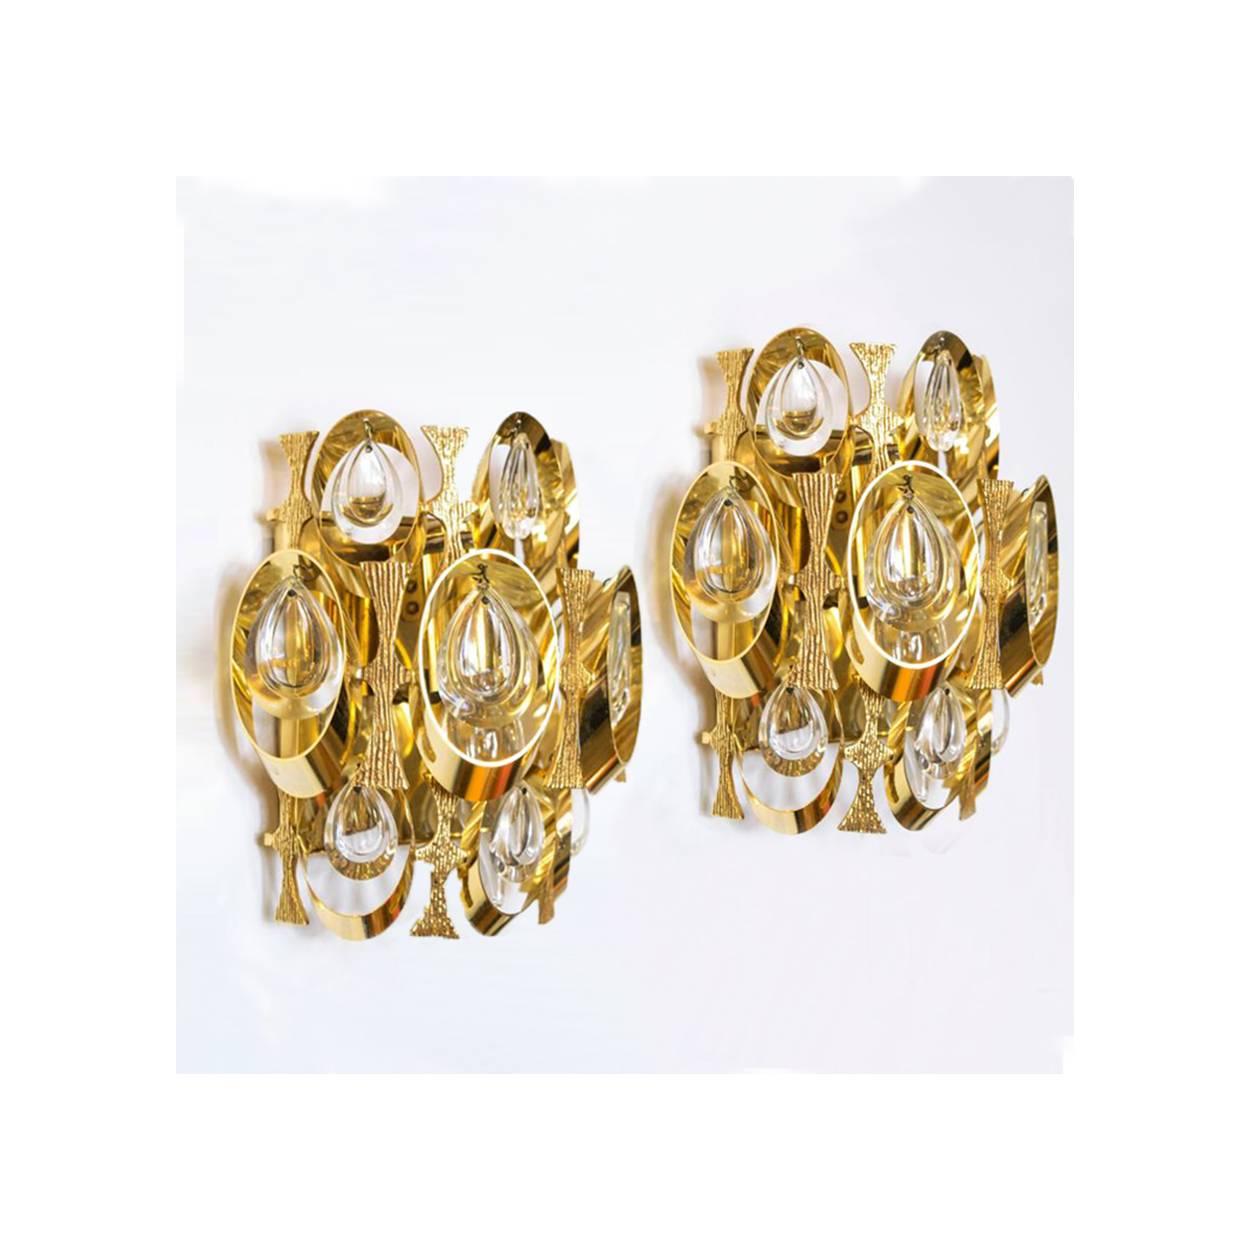 Brutalist Pair of Crystal and Gold-Plated Sciolari Wall Sconces, Italy, 1960